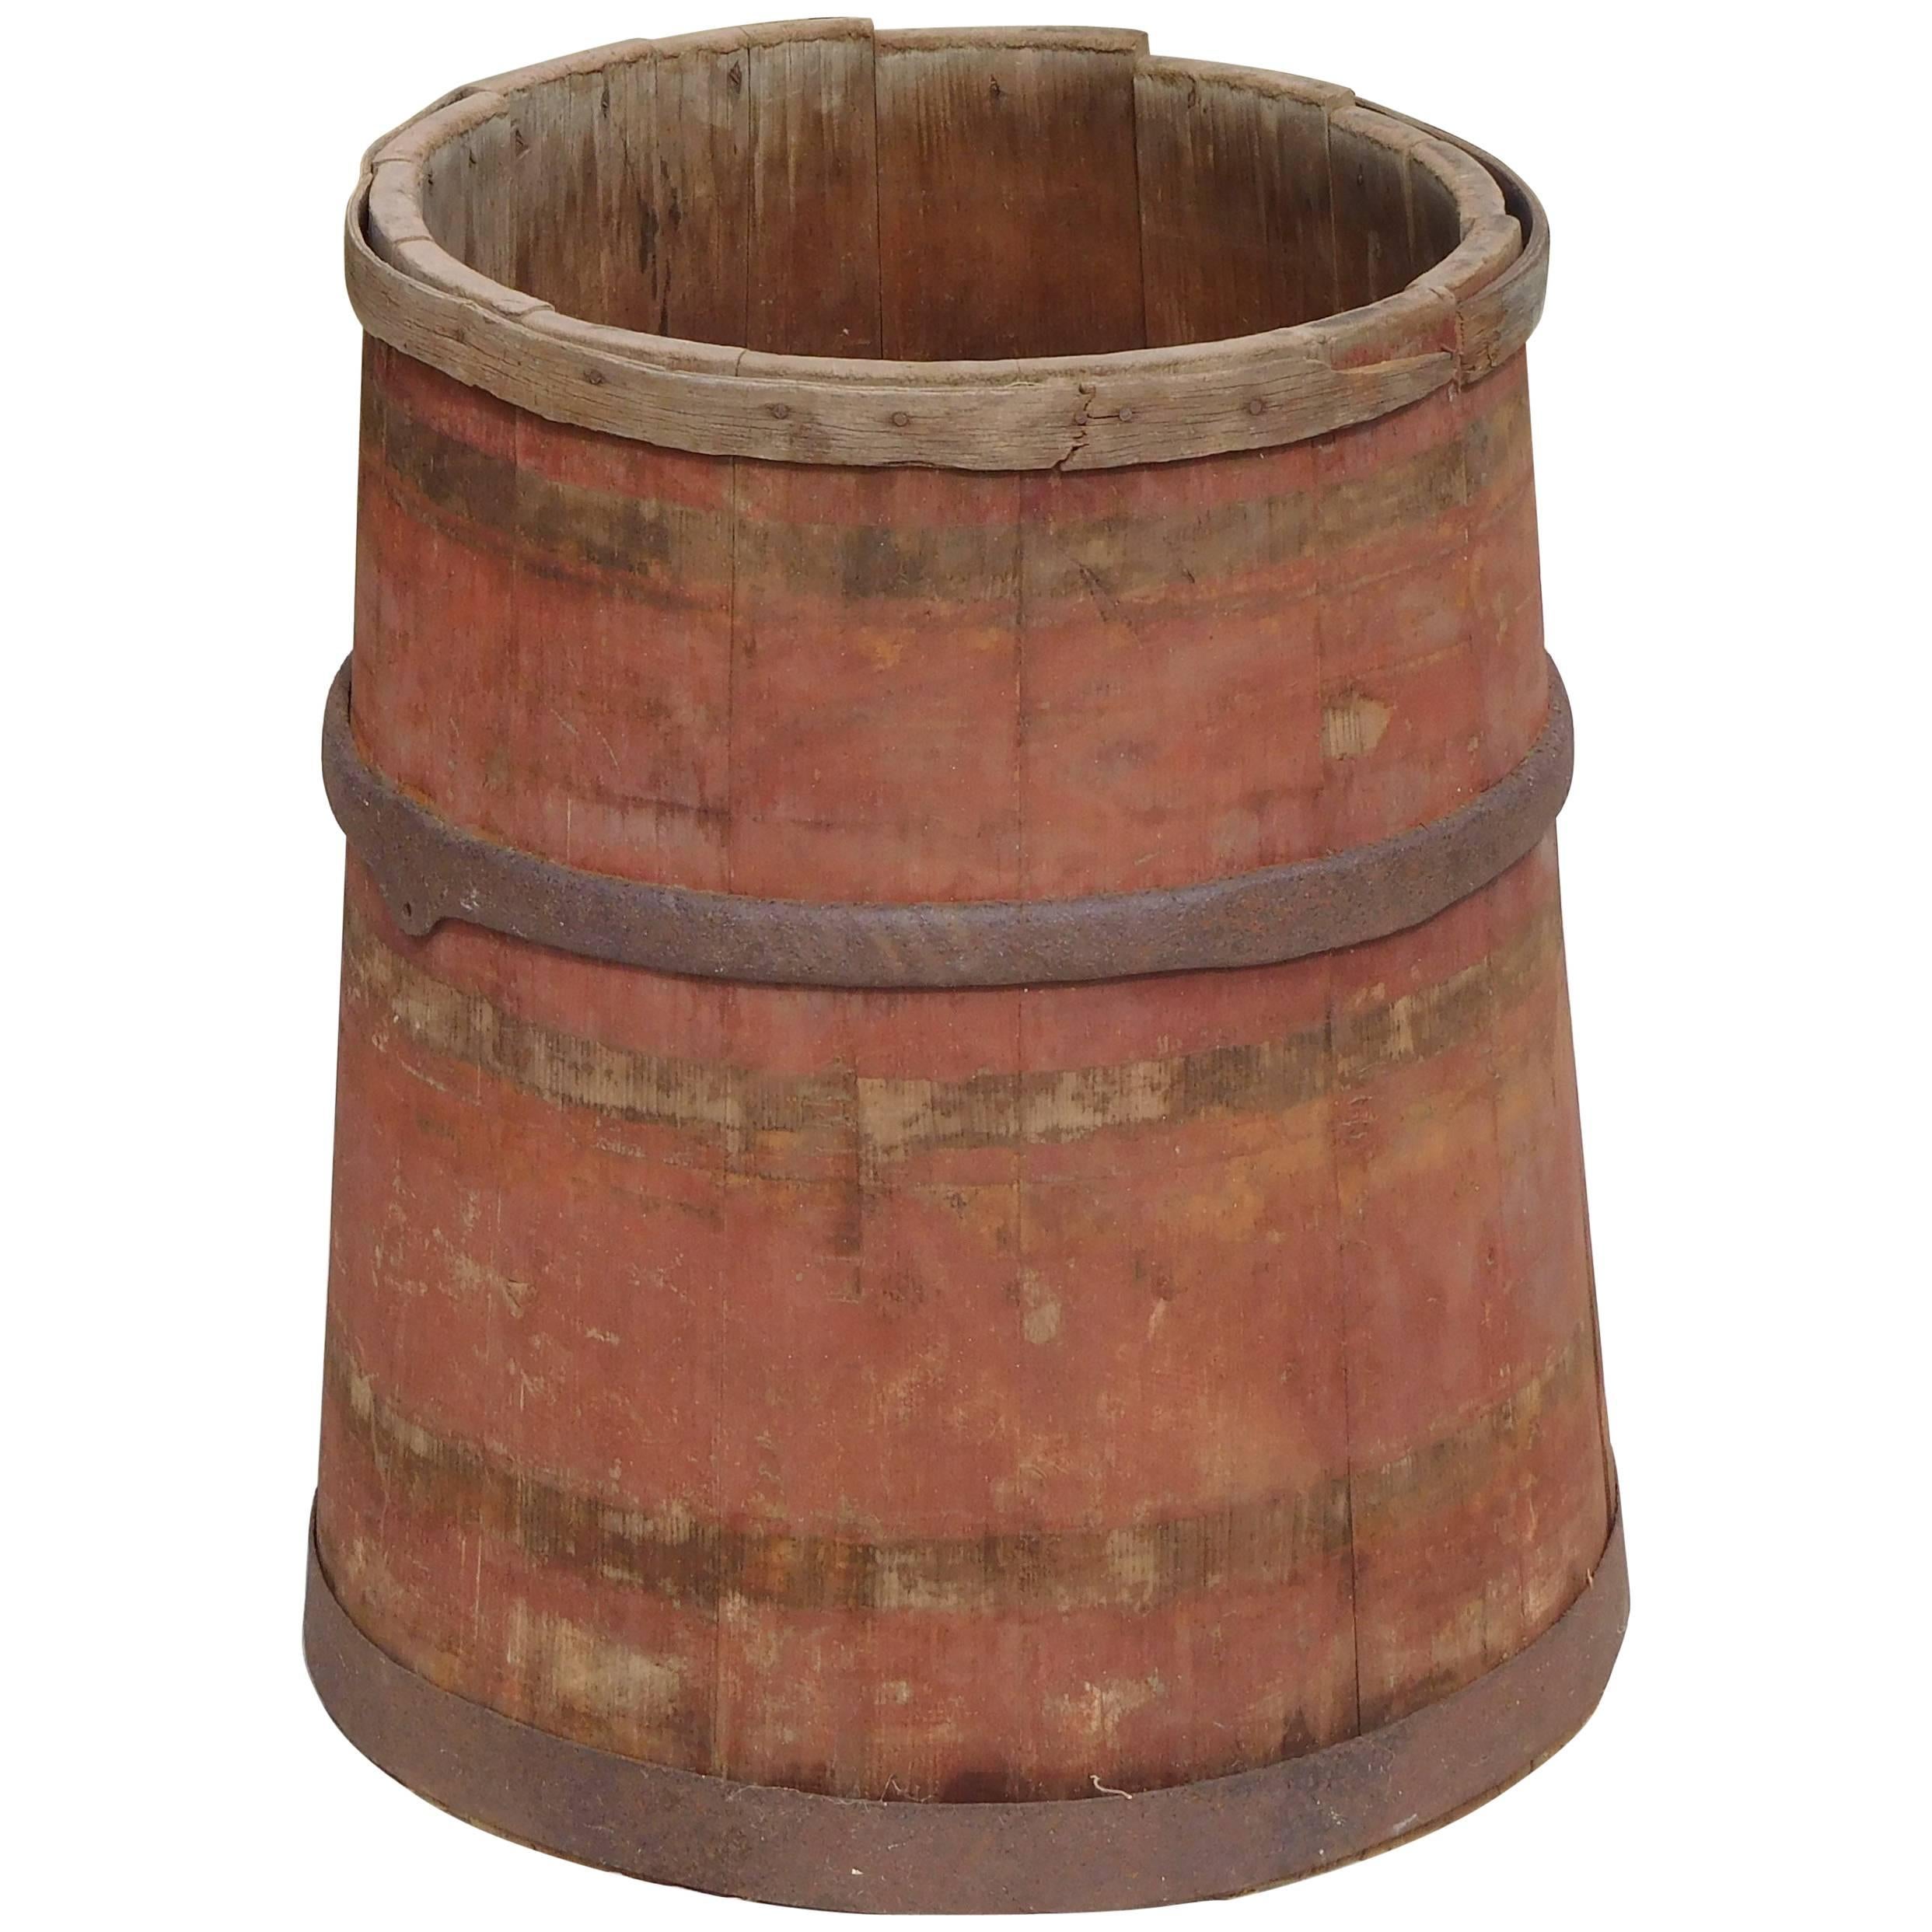 Large Master Maple Sap Collecting Barrel in Old Red Wash, Vermont, circa 1880 For Sale